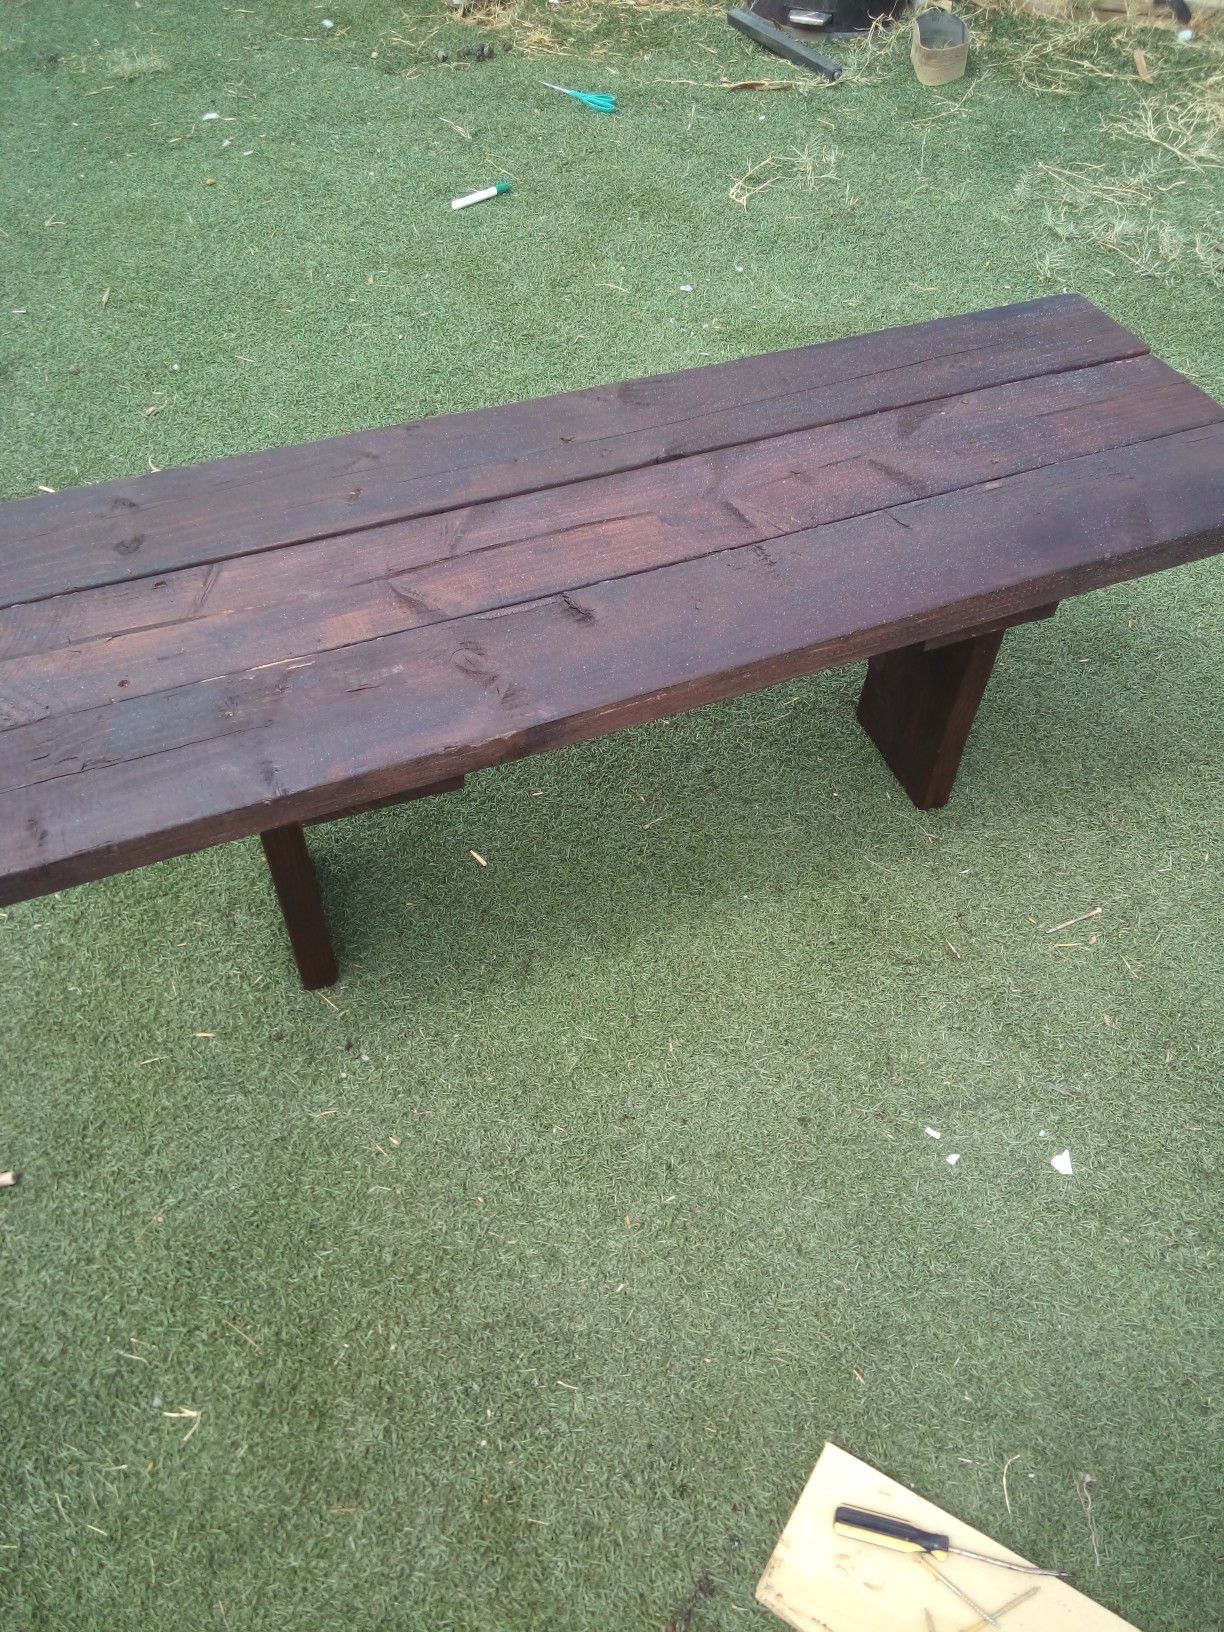 BEAUTIFUL RUSTIC COFFEE TABLE 4FT LONG 16 1/2 WIDE AND BOUT 18IN TALL $60 FIRM ITS BEEN STAINED WITH A GORGEOUS RED MAHOGANY COLOR